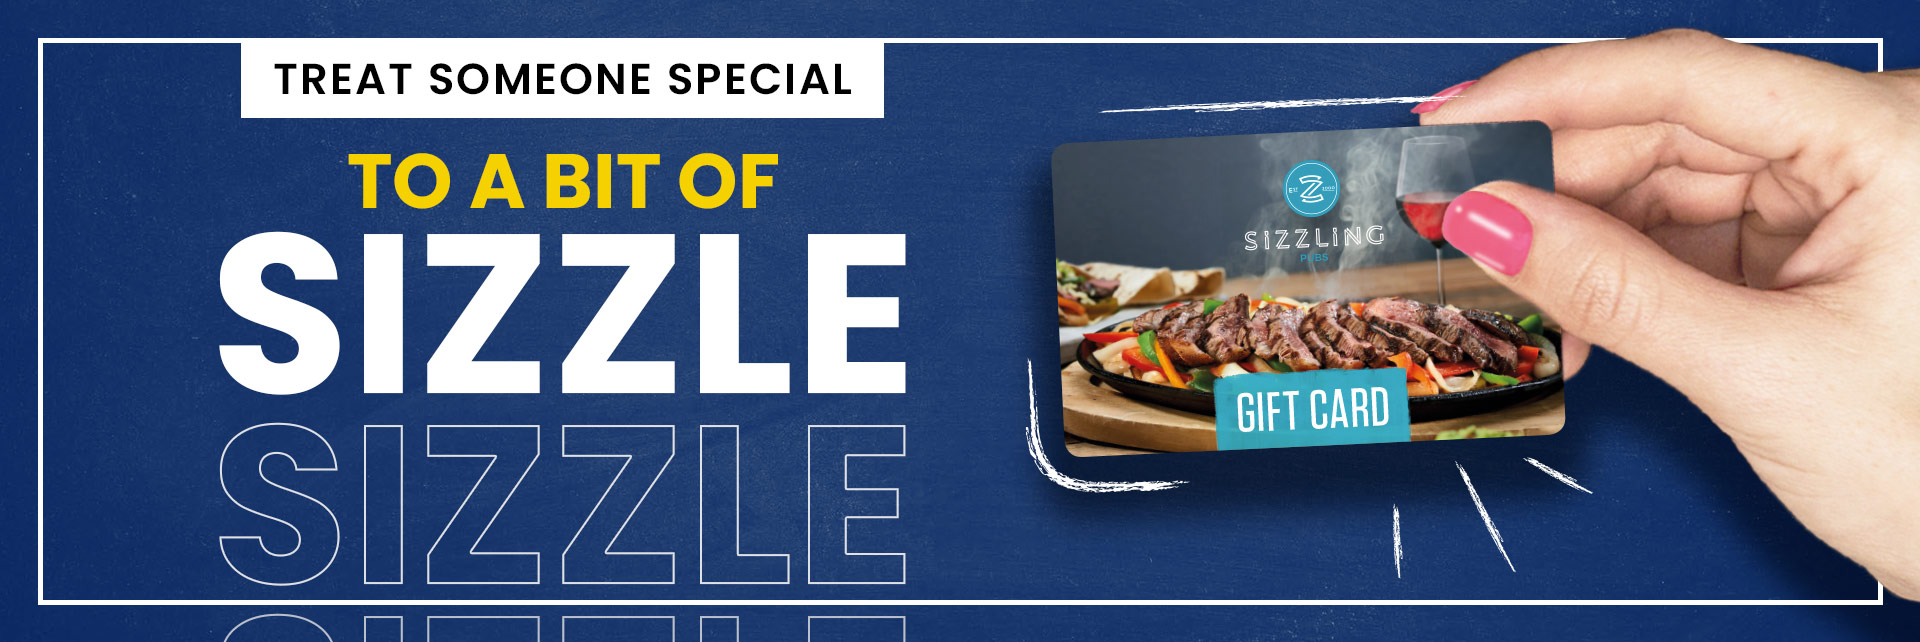 Sizzling Pubs Gift Card at The Giffard Park in Milton Keynes